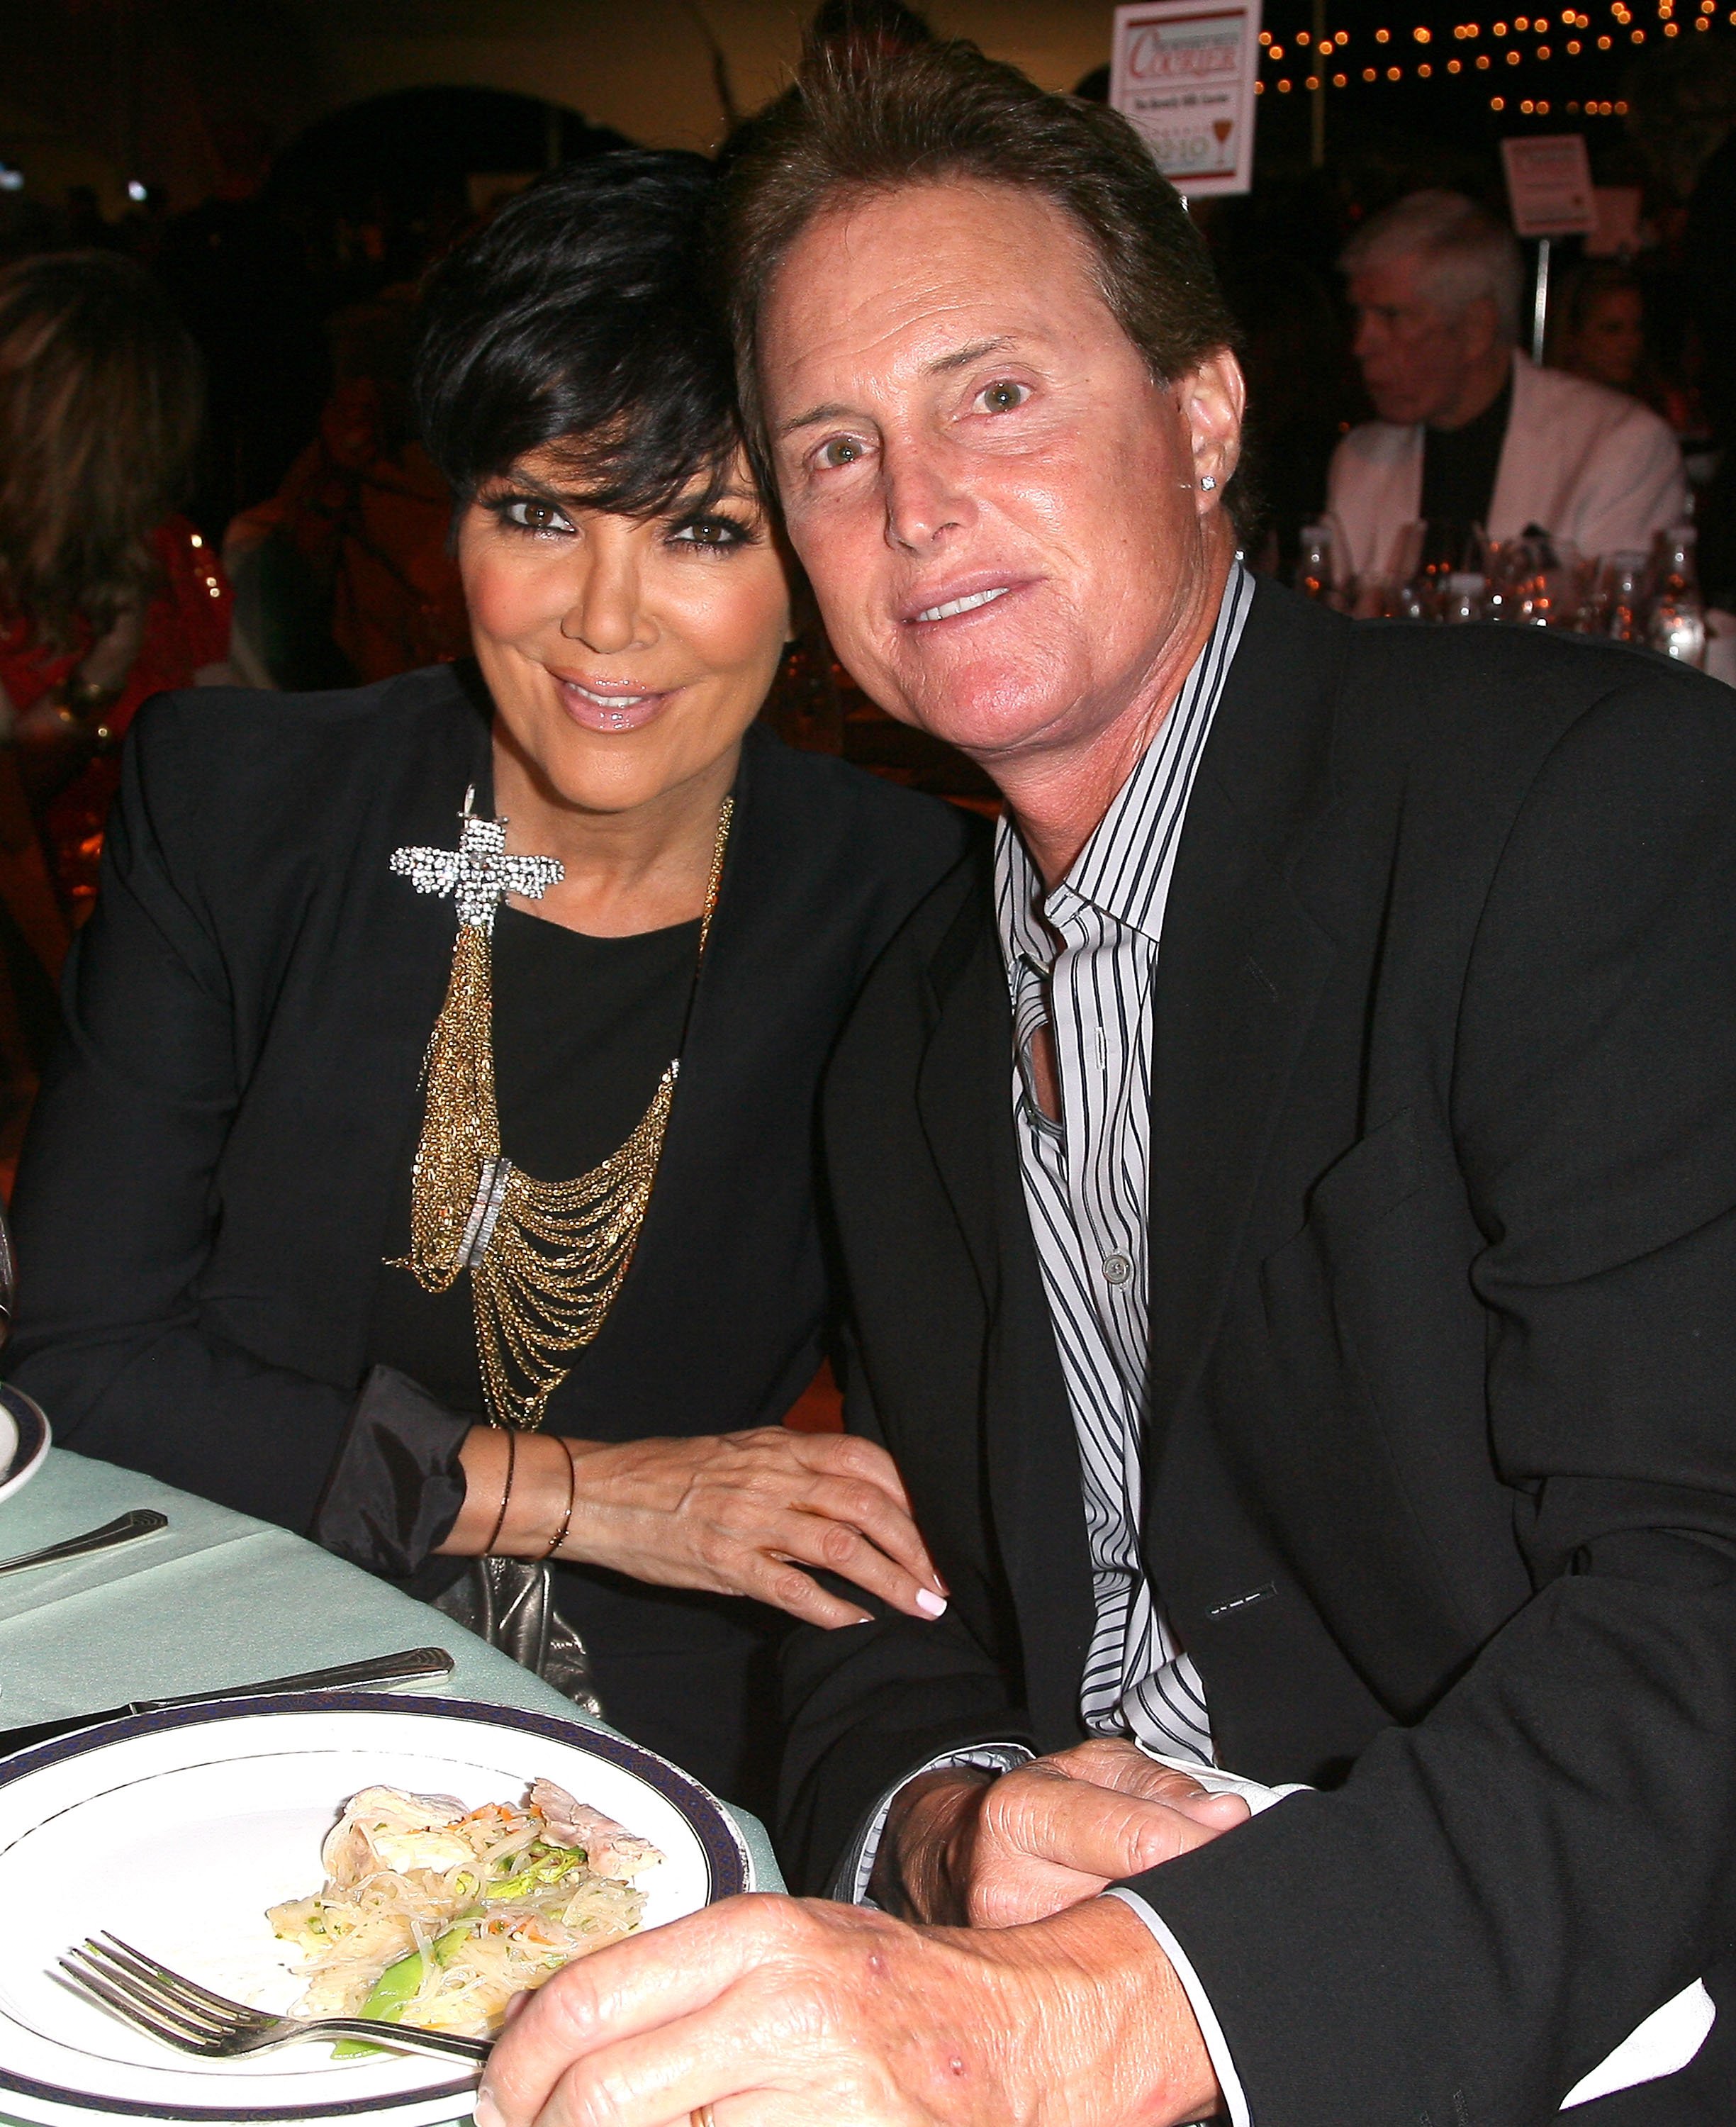 Kris Jenner and Bruce Jenner attend the Taste Of Beverly Hills Wine & Food Festival Opening Night on September 2, 2010 in Beverly Hills, California | Photo: GettyImages